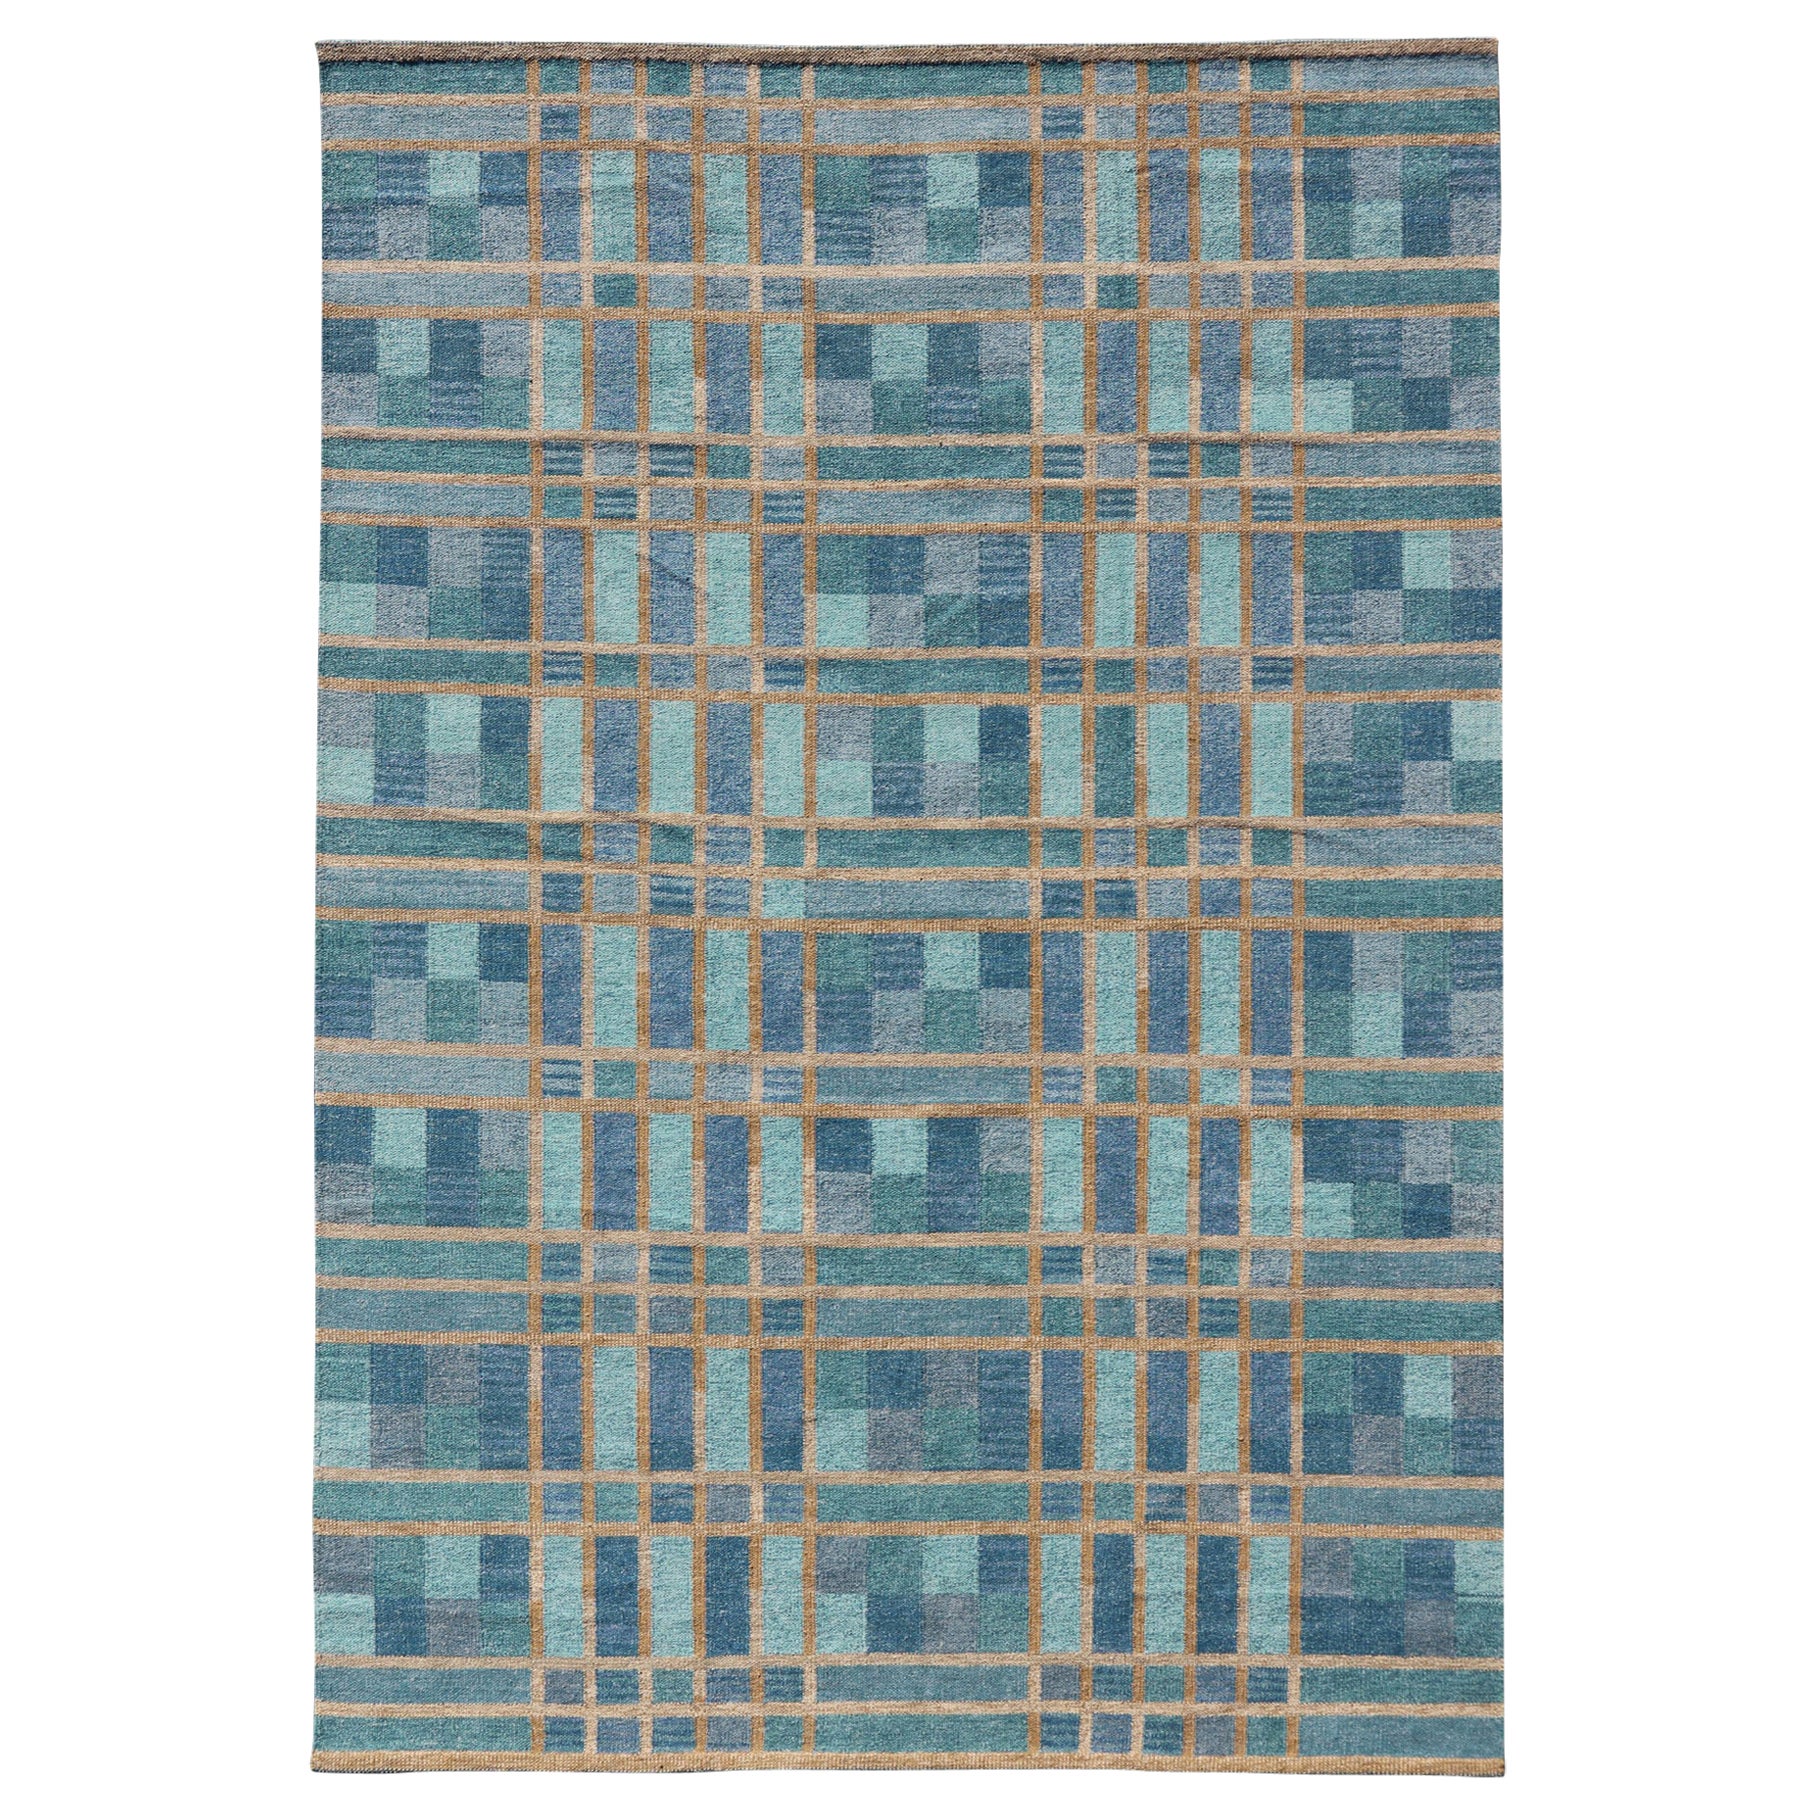 Large Scandinavian Inspired Design Rug in Blue, Teal, Green, and Gold